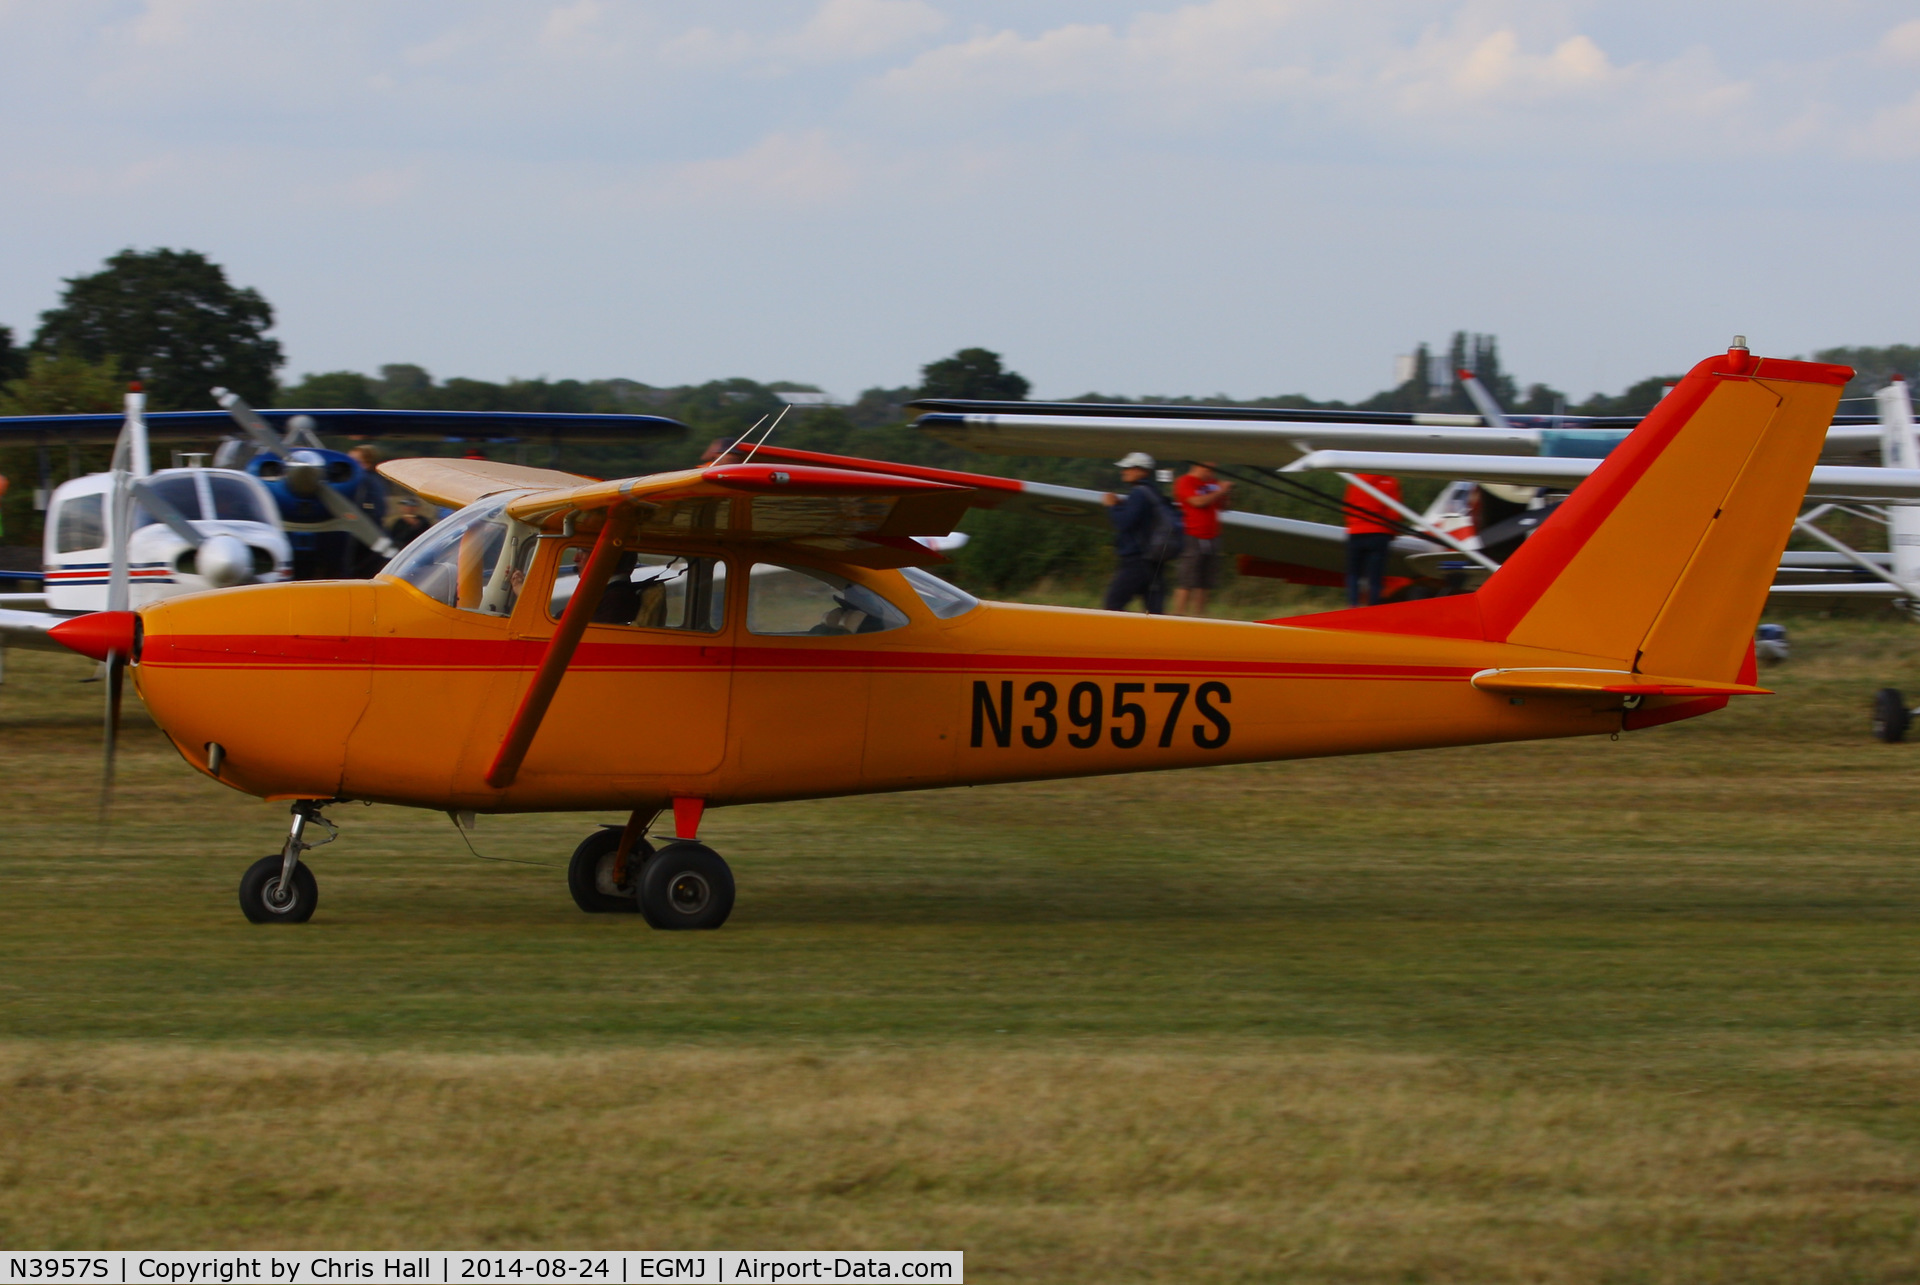 N3957S, 1964 Cessna 172E C/N 17251157, at the Little Gransden Airshow 2014